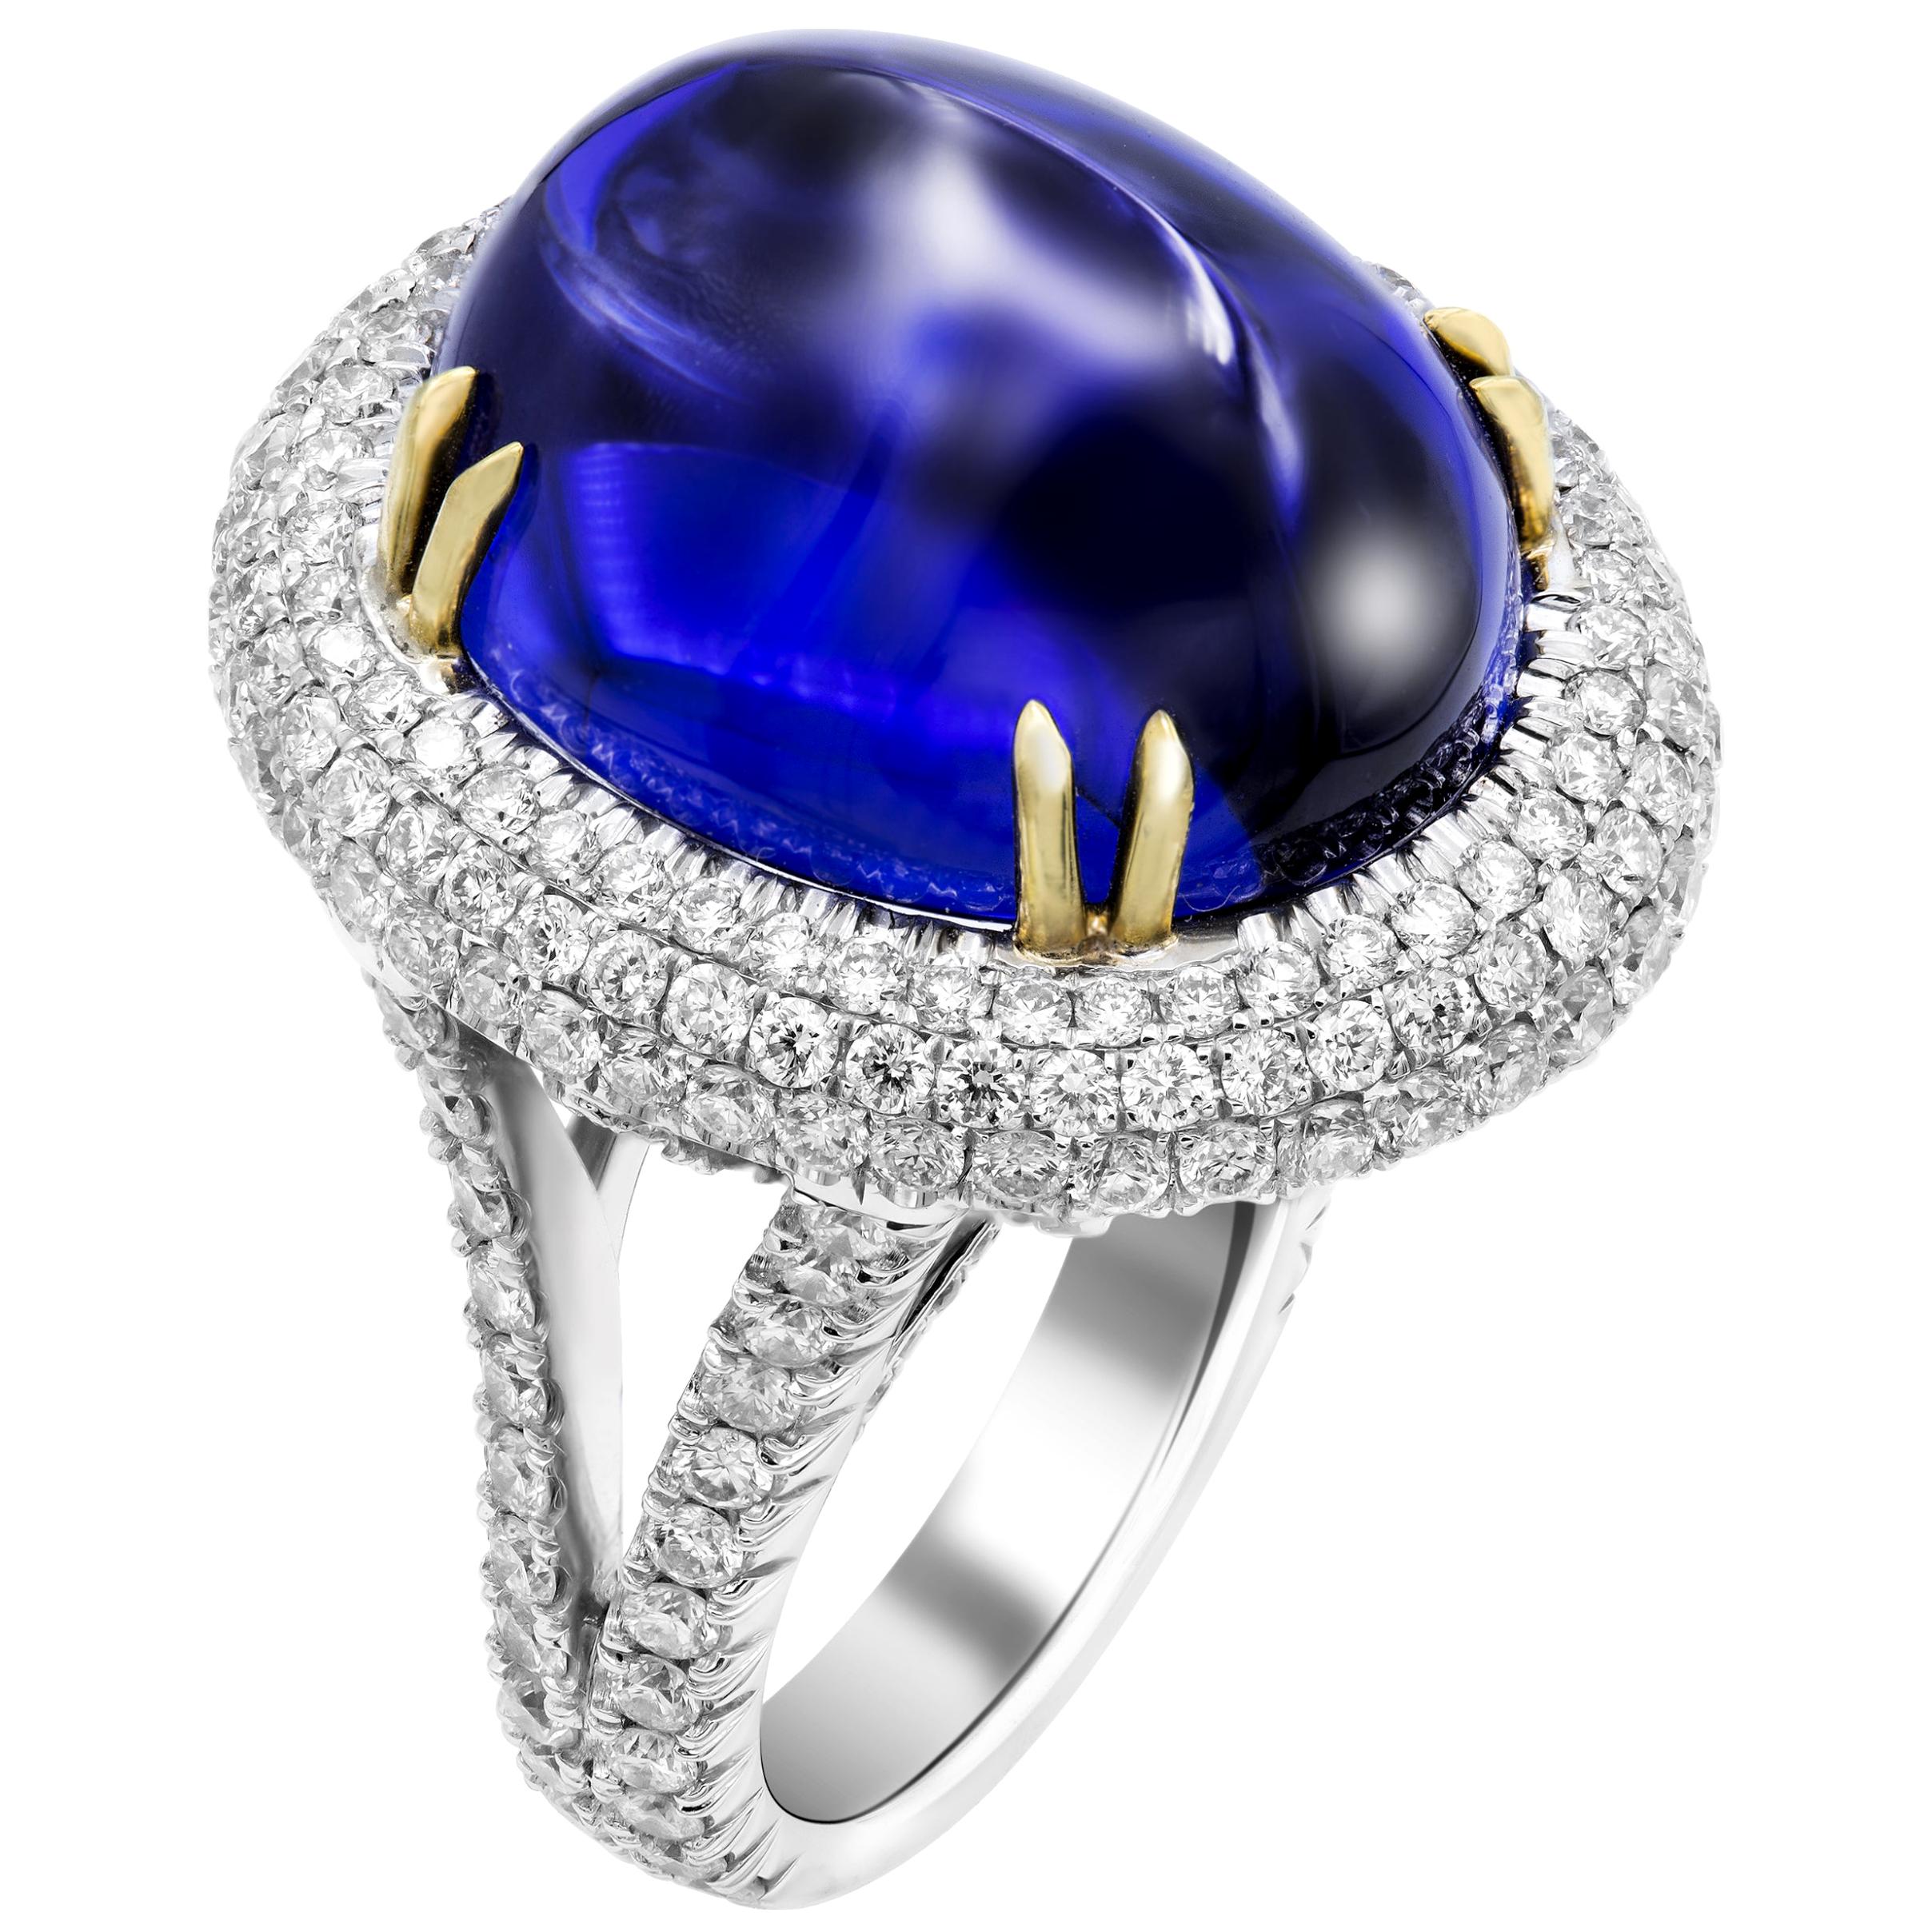 GIA Certified 26.37 Carat Oval Tanzanite Cabochon Diamond Cocktail Ring For Sale